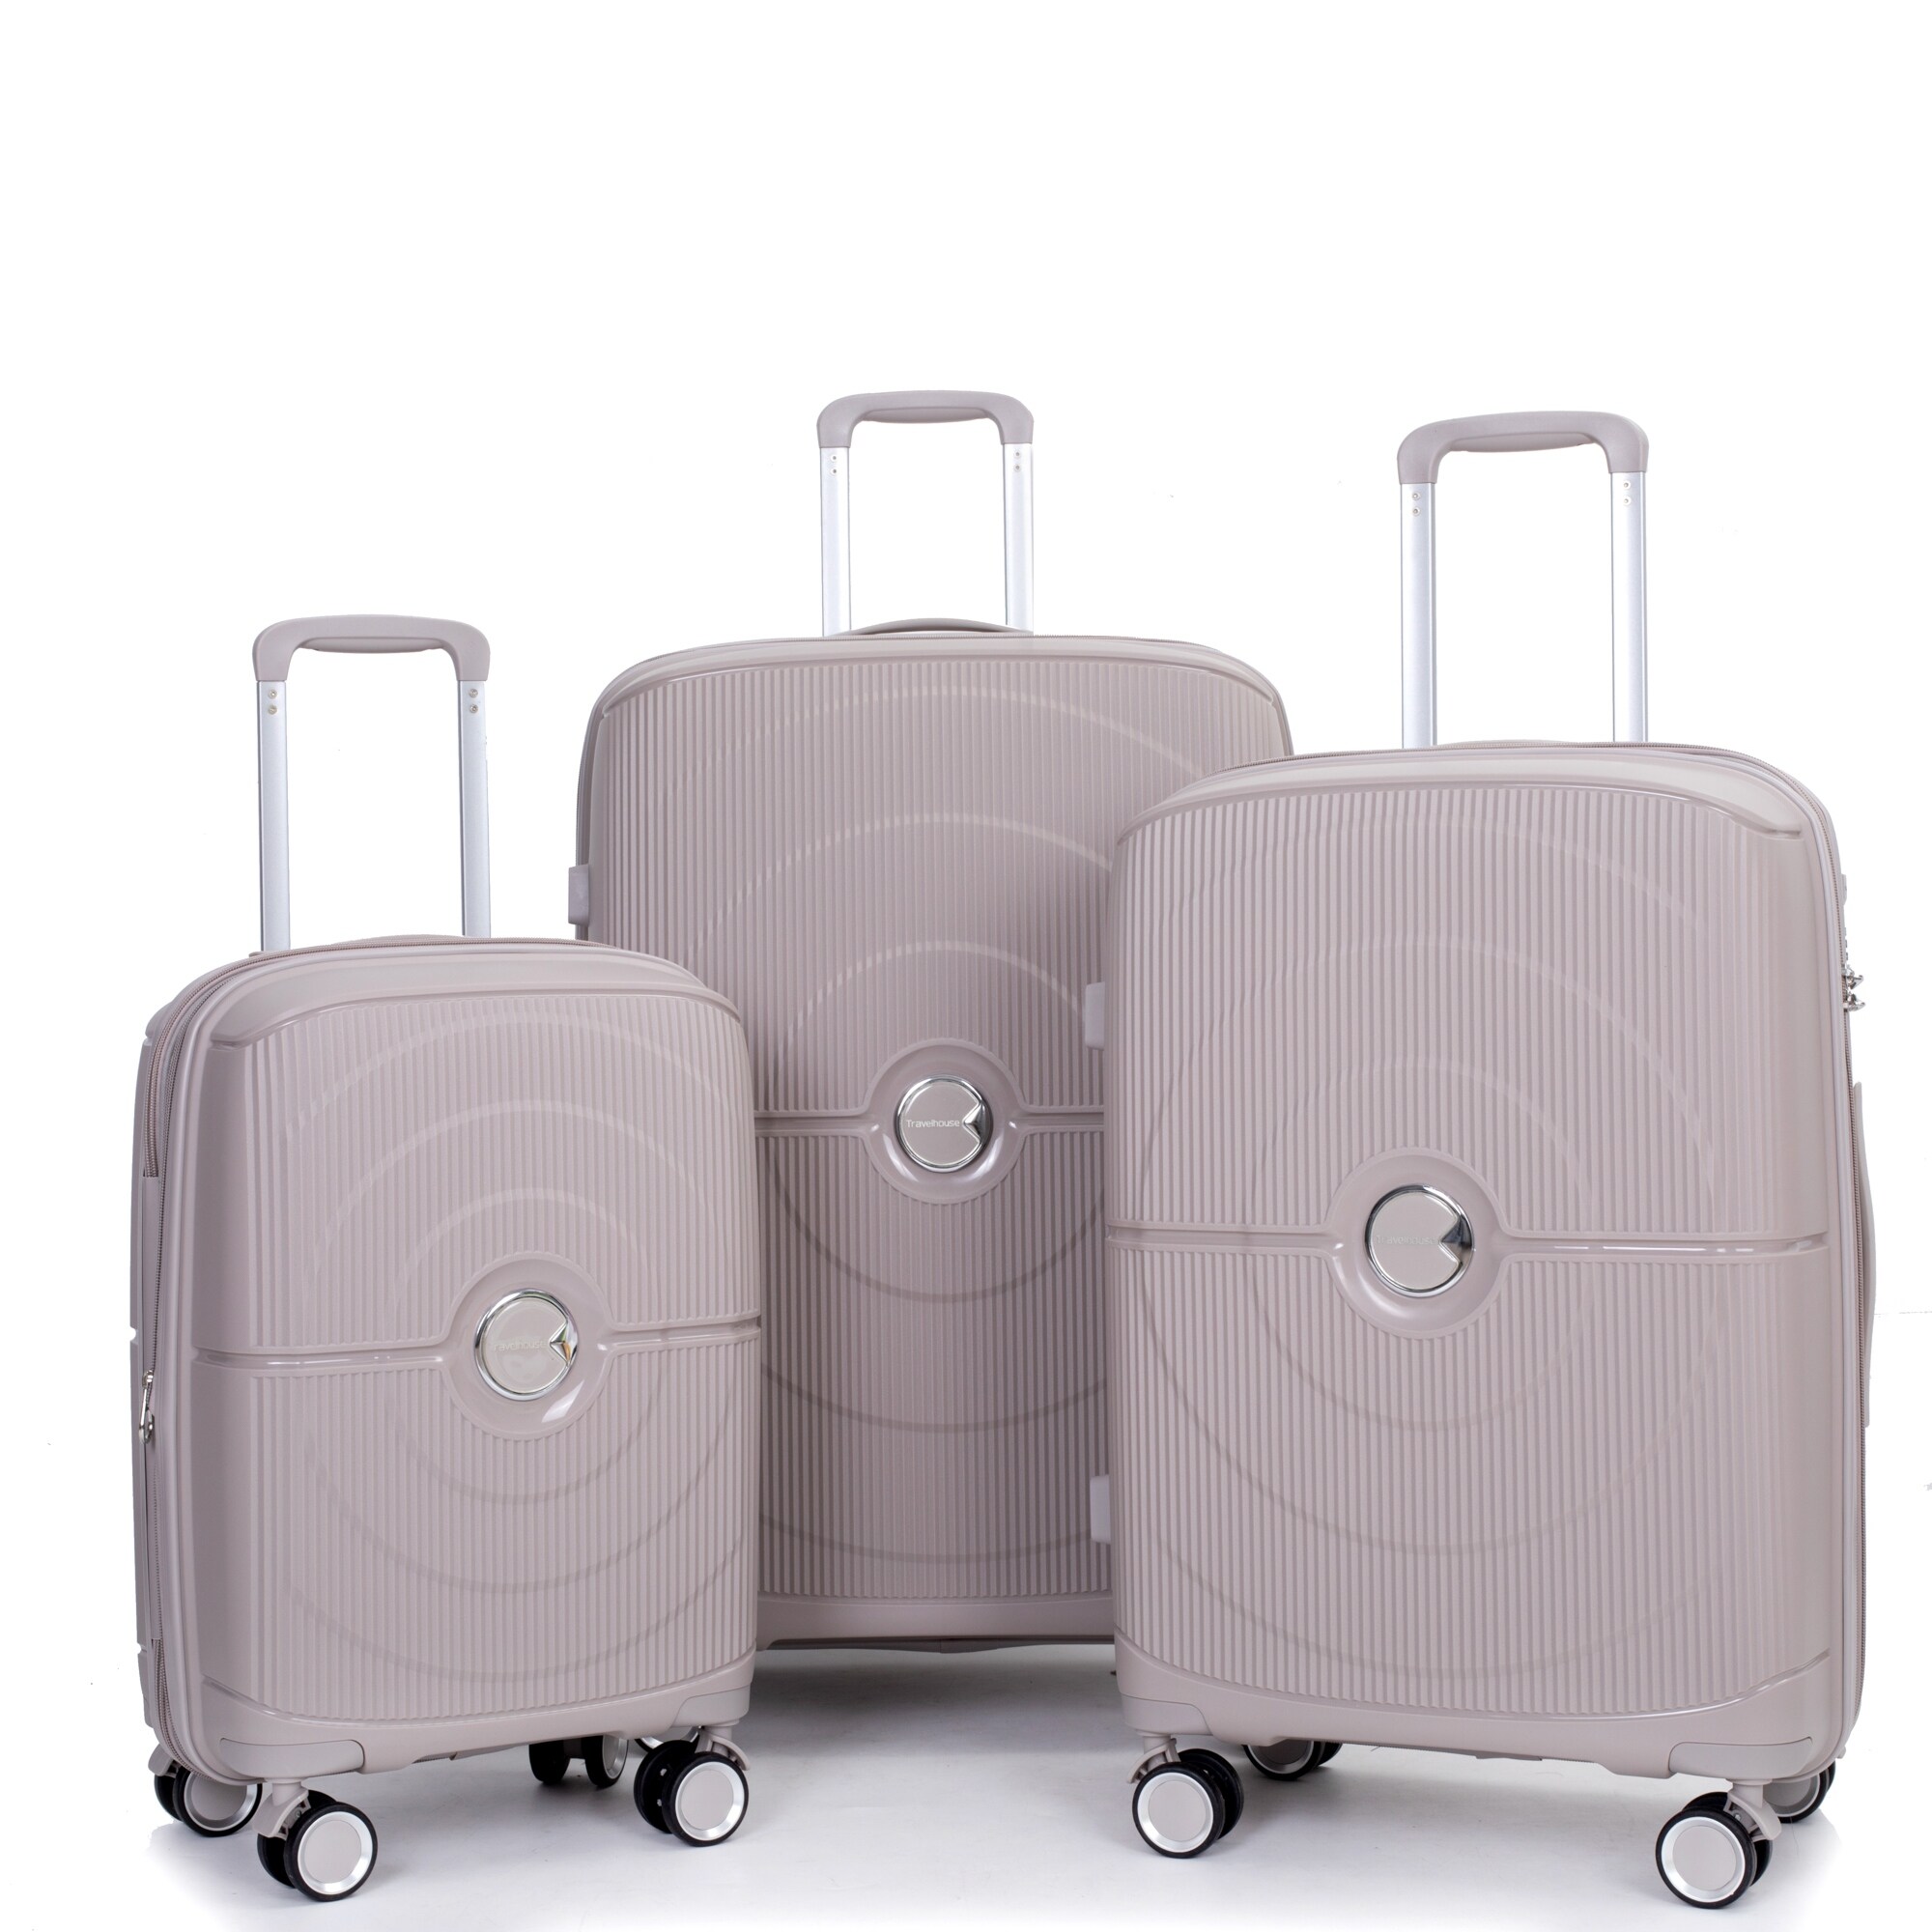 3-Piece Modern Luggage Sets, Expandable Hardshell Carry On Luggage with  Double Spinner Wheels, Trunk Sets with TSA Lock - Bed Bath & Beyond -  38916824